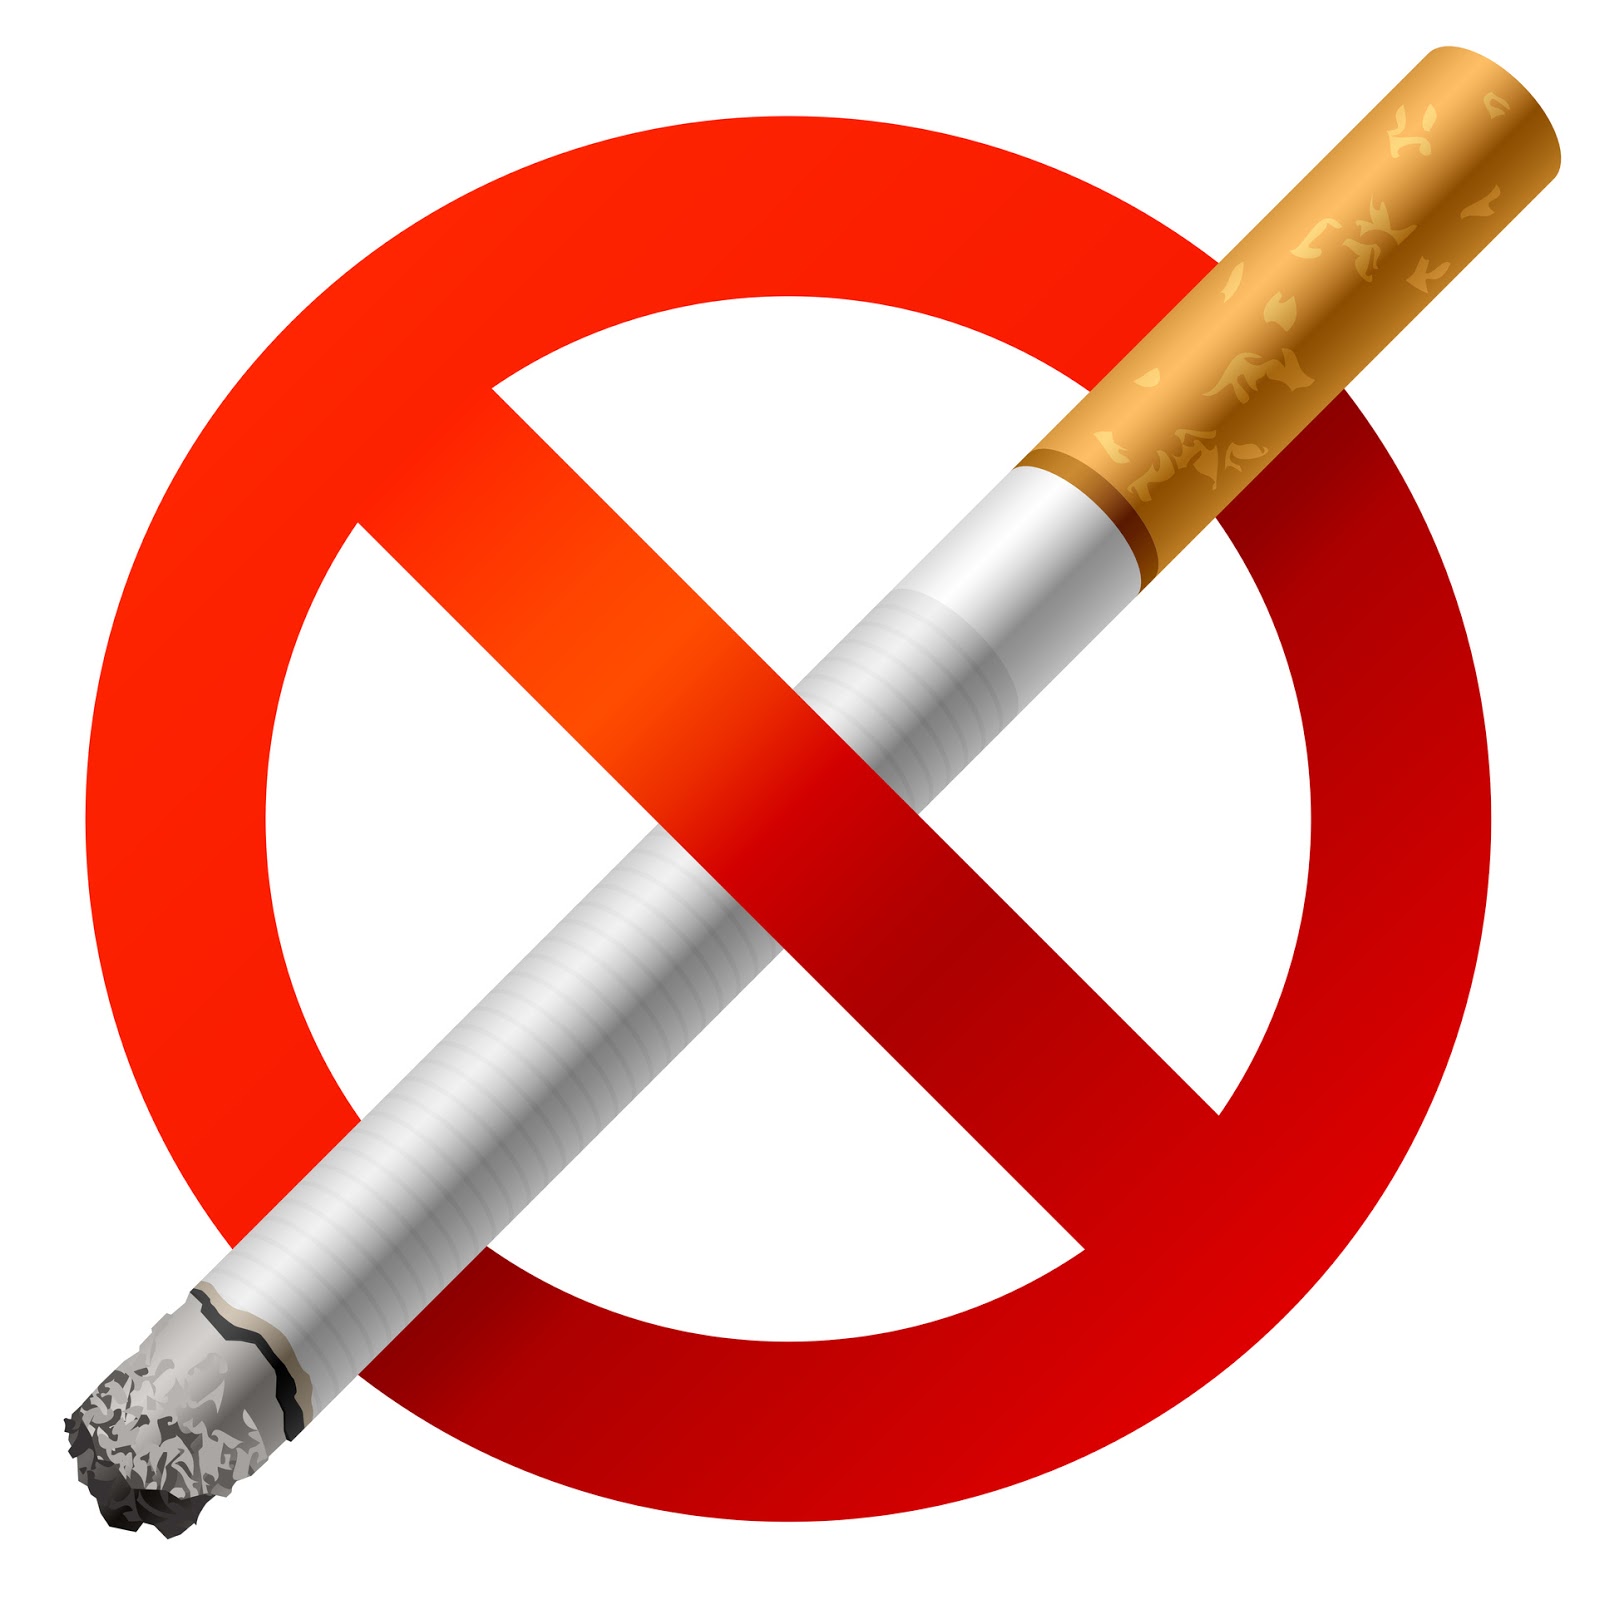 The Employee Assistance Program is offering smoking cessation programs. Options include group sessions, quitting with a friend or meeting individually with a counselor.